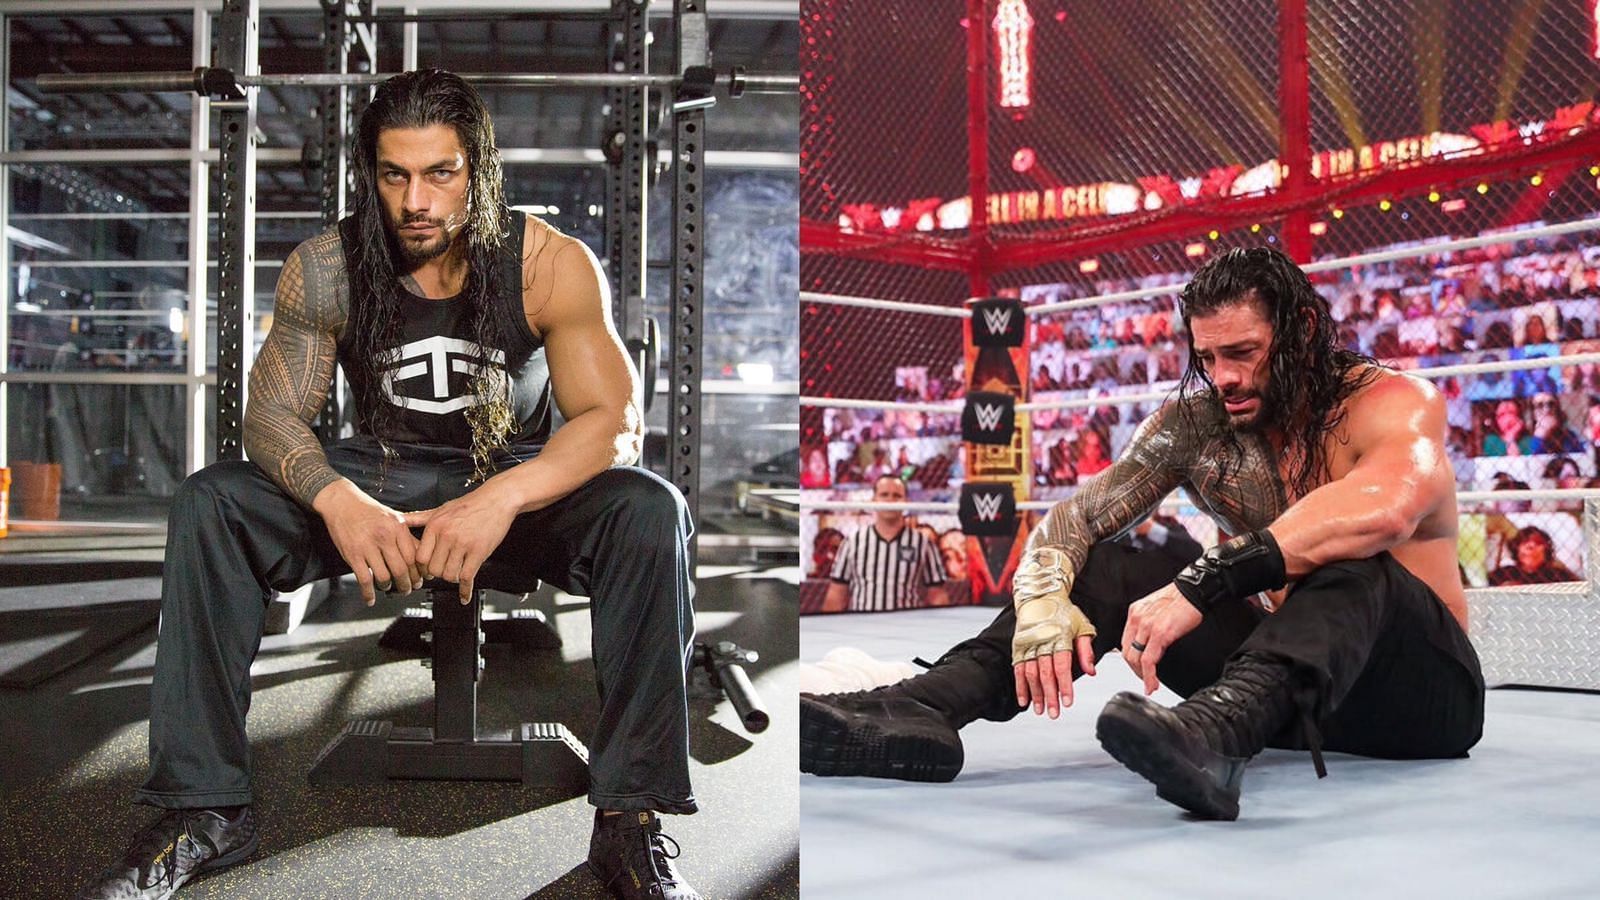 Roman Reigns had one of the most dominant championship runs in WWE history!